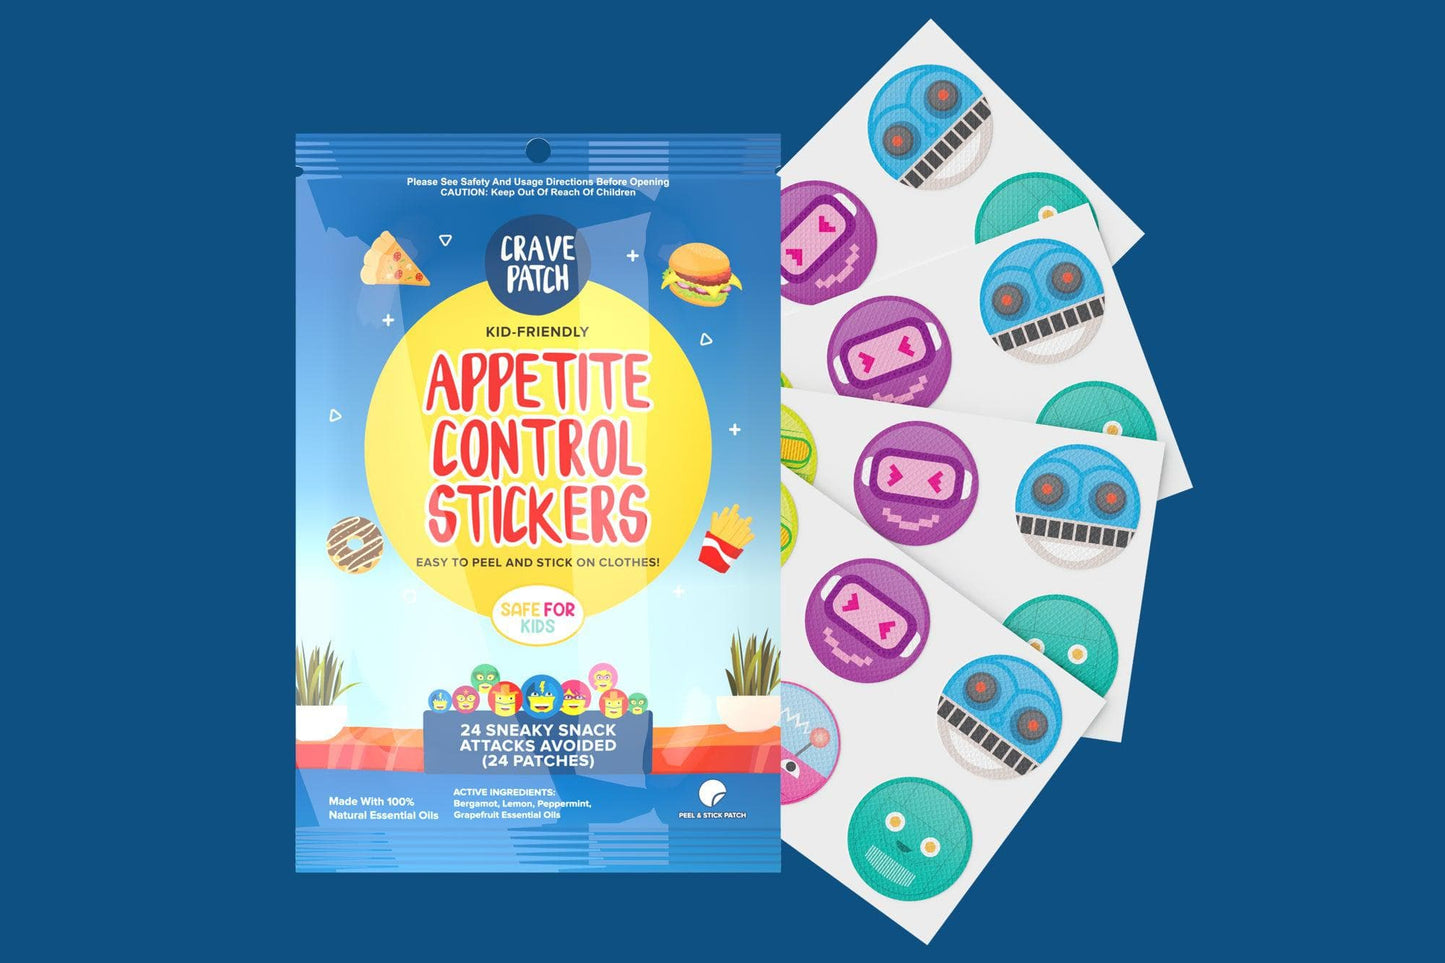 30 x CravePatch Appetite Control Stickers individual resale packets in a Retail Display Box